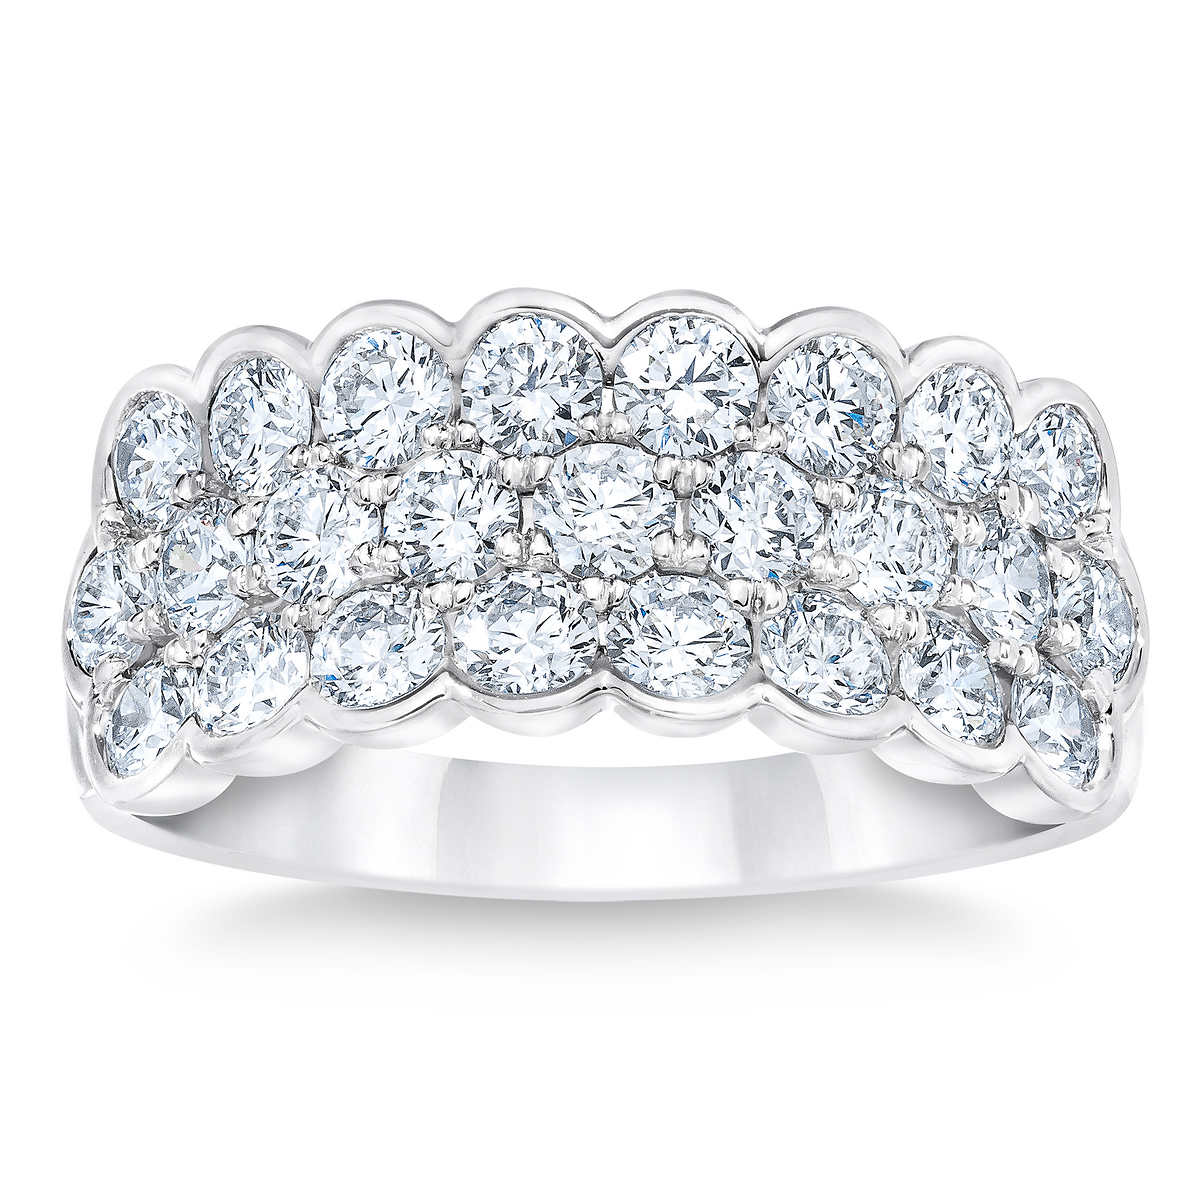 VS2 Diamond Band Ring. Teno Stainless Steel 0.02 CTW Color G